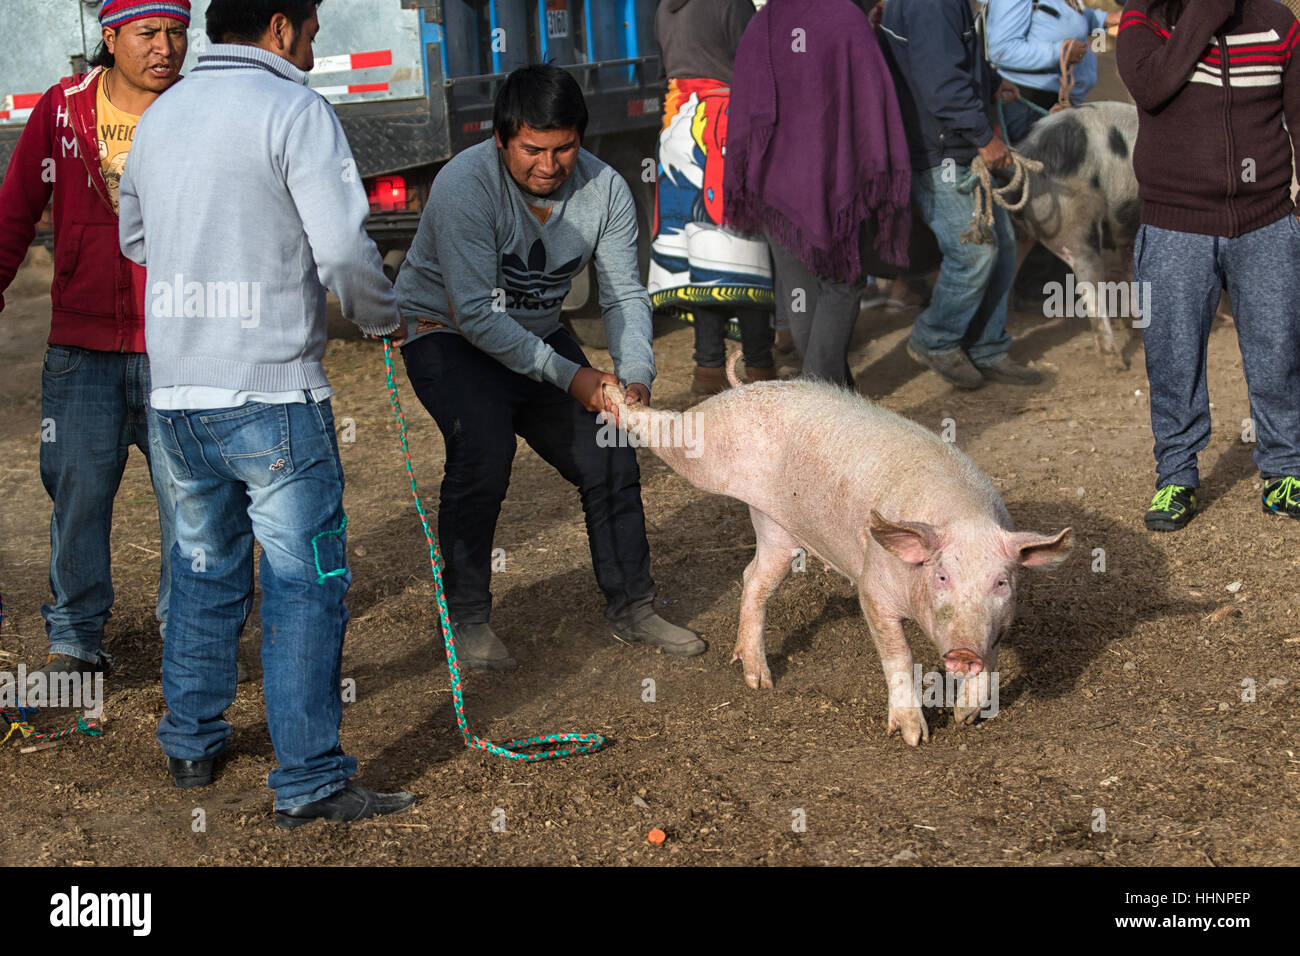 August 6, 2016 Otavalo, Ecuador: a man hold back a pig from running away by grabbing one of the rear legs of the animal Stock Photo